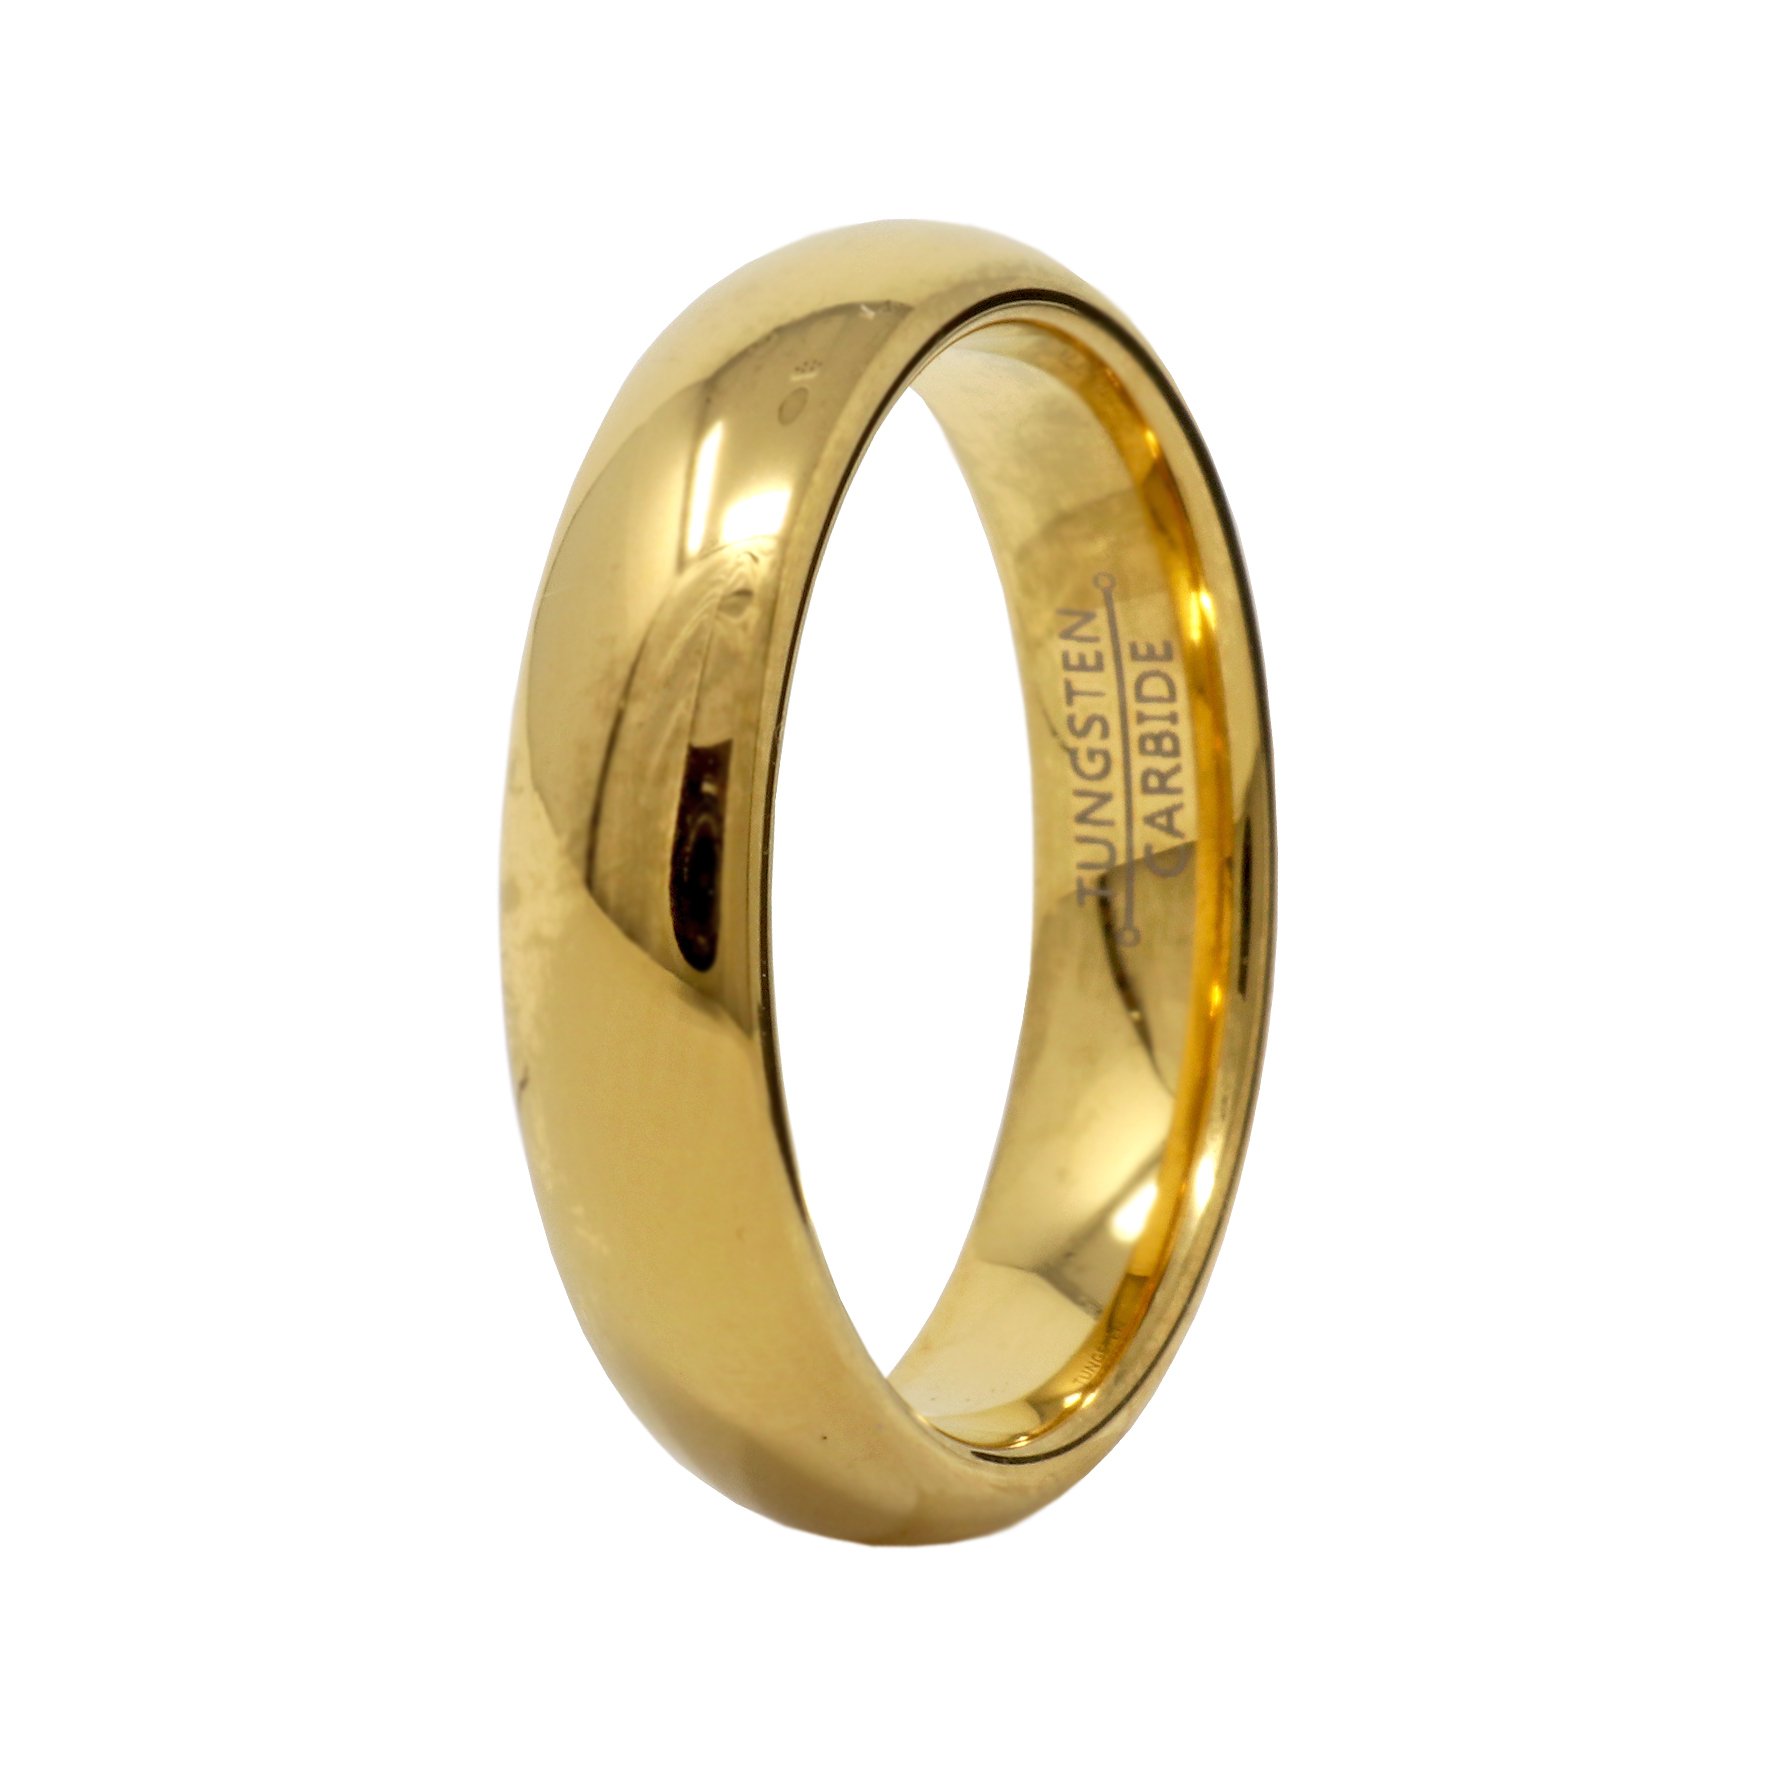 Tungsten Ring Size 11 - 5mm Gold Plated Domed